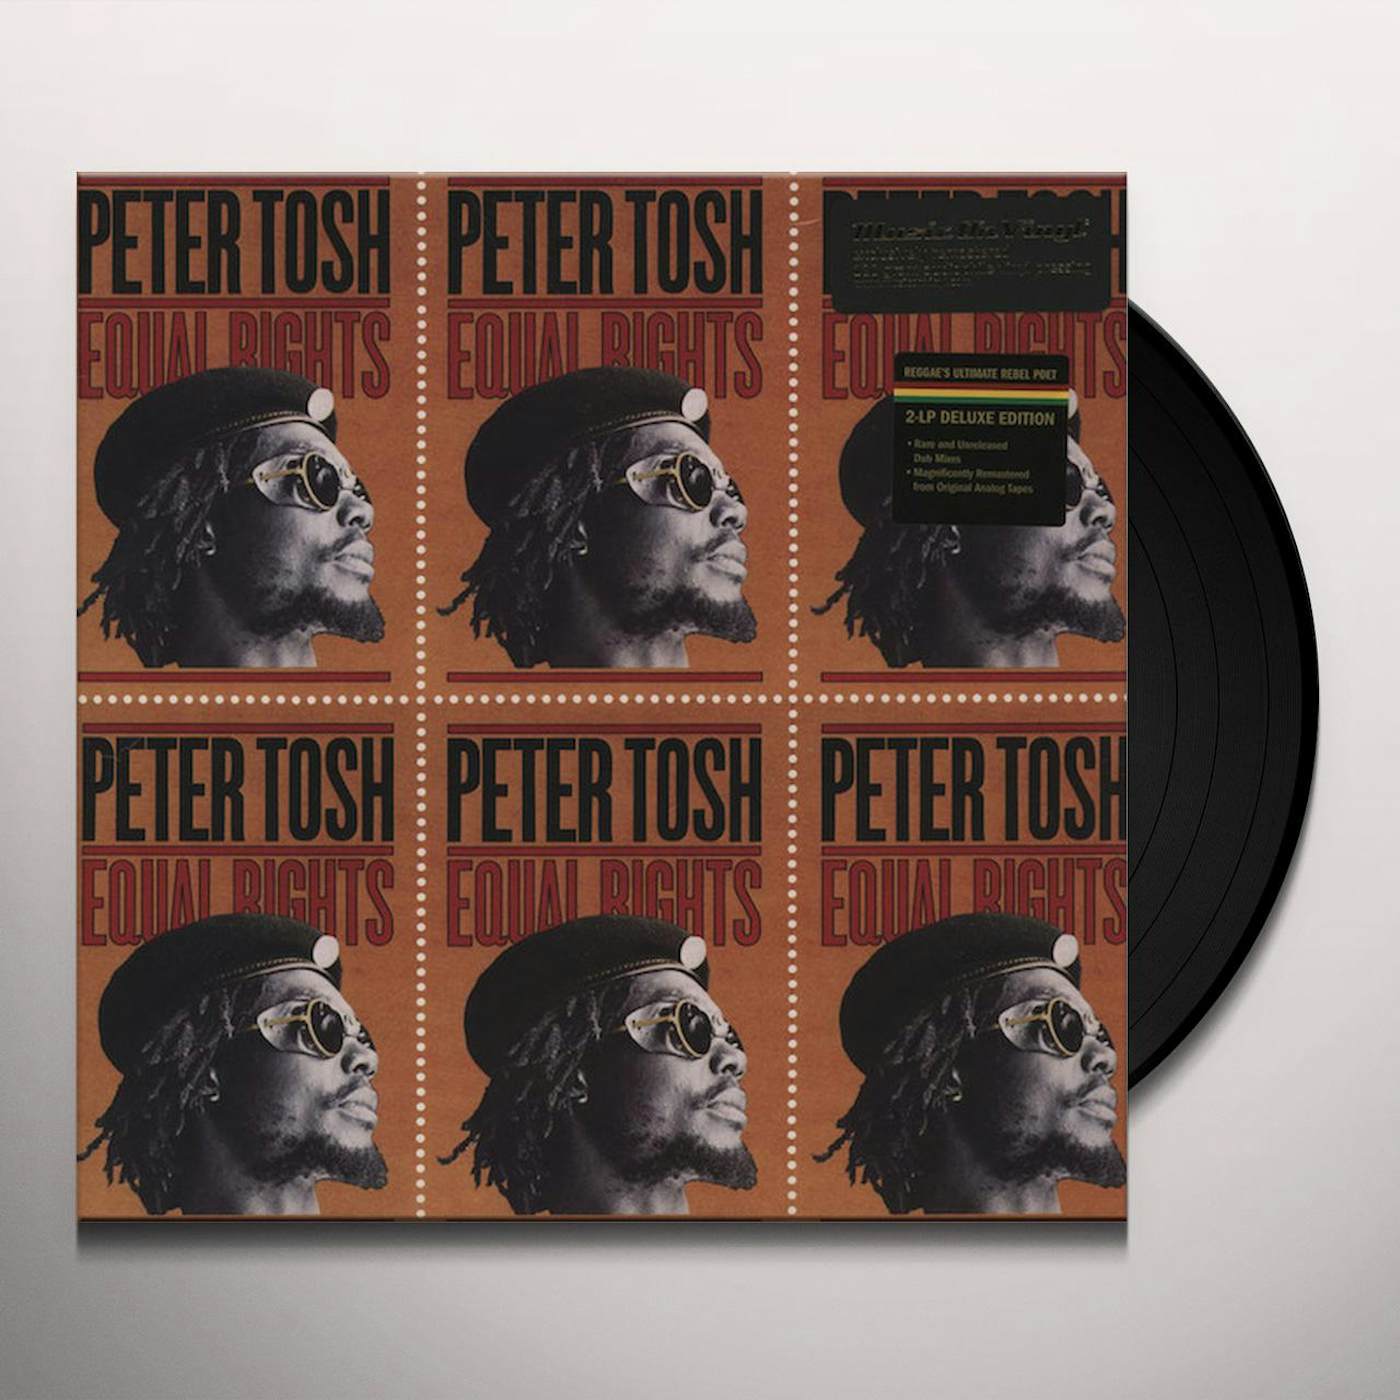 Peter Tosh Equal Rights Vinyl Record